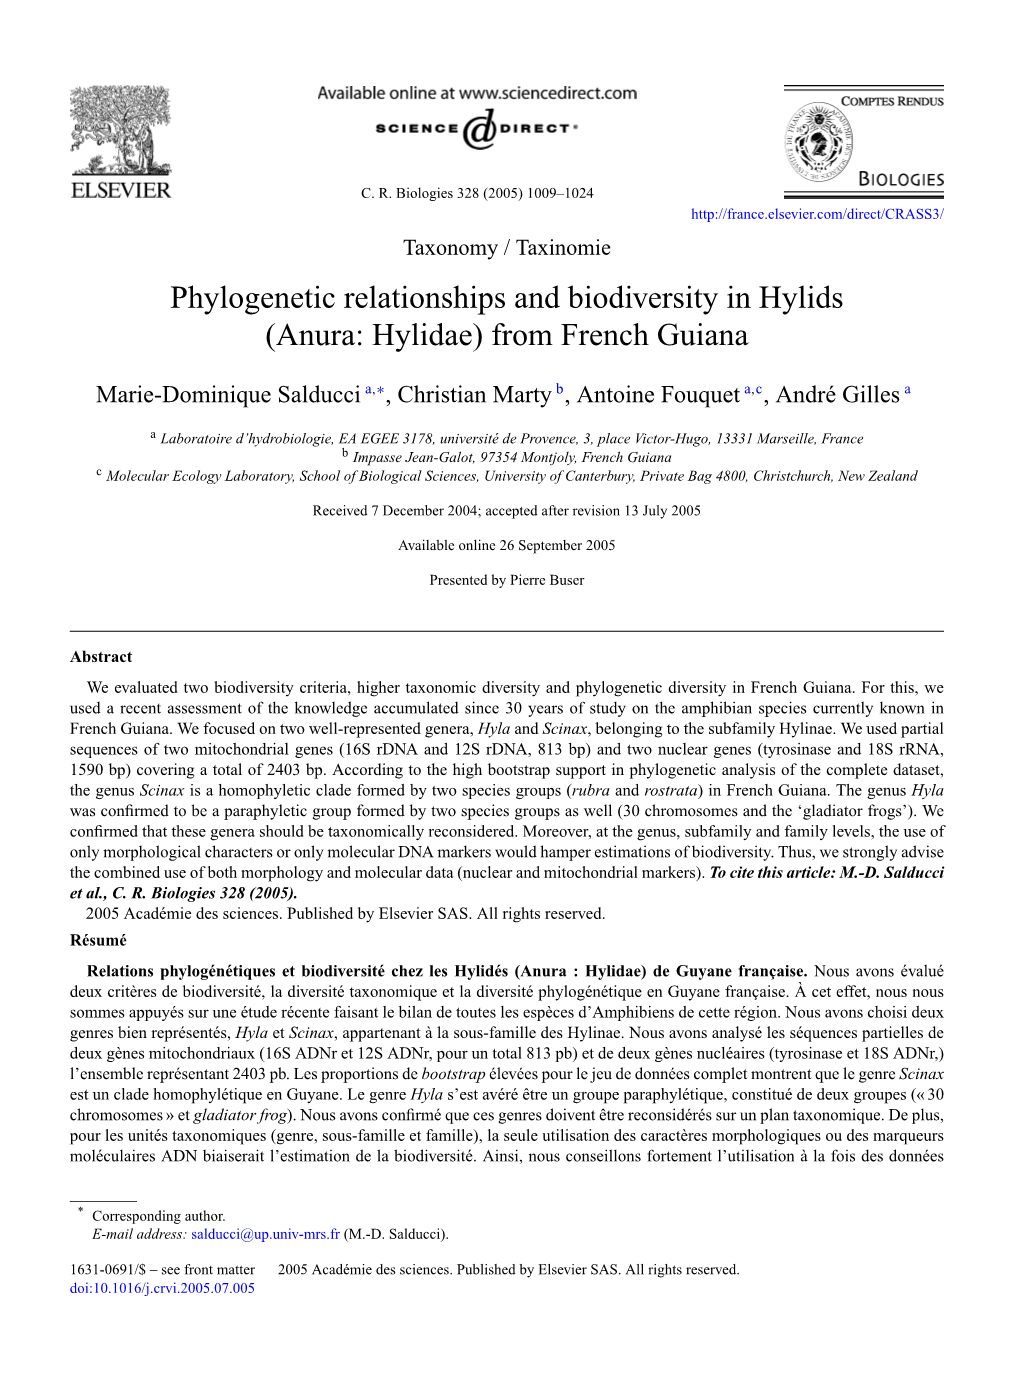 Phylogenetic Relationships and Biodiversity in Hylids (Anura: Hylidae) from French Guiana